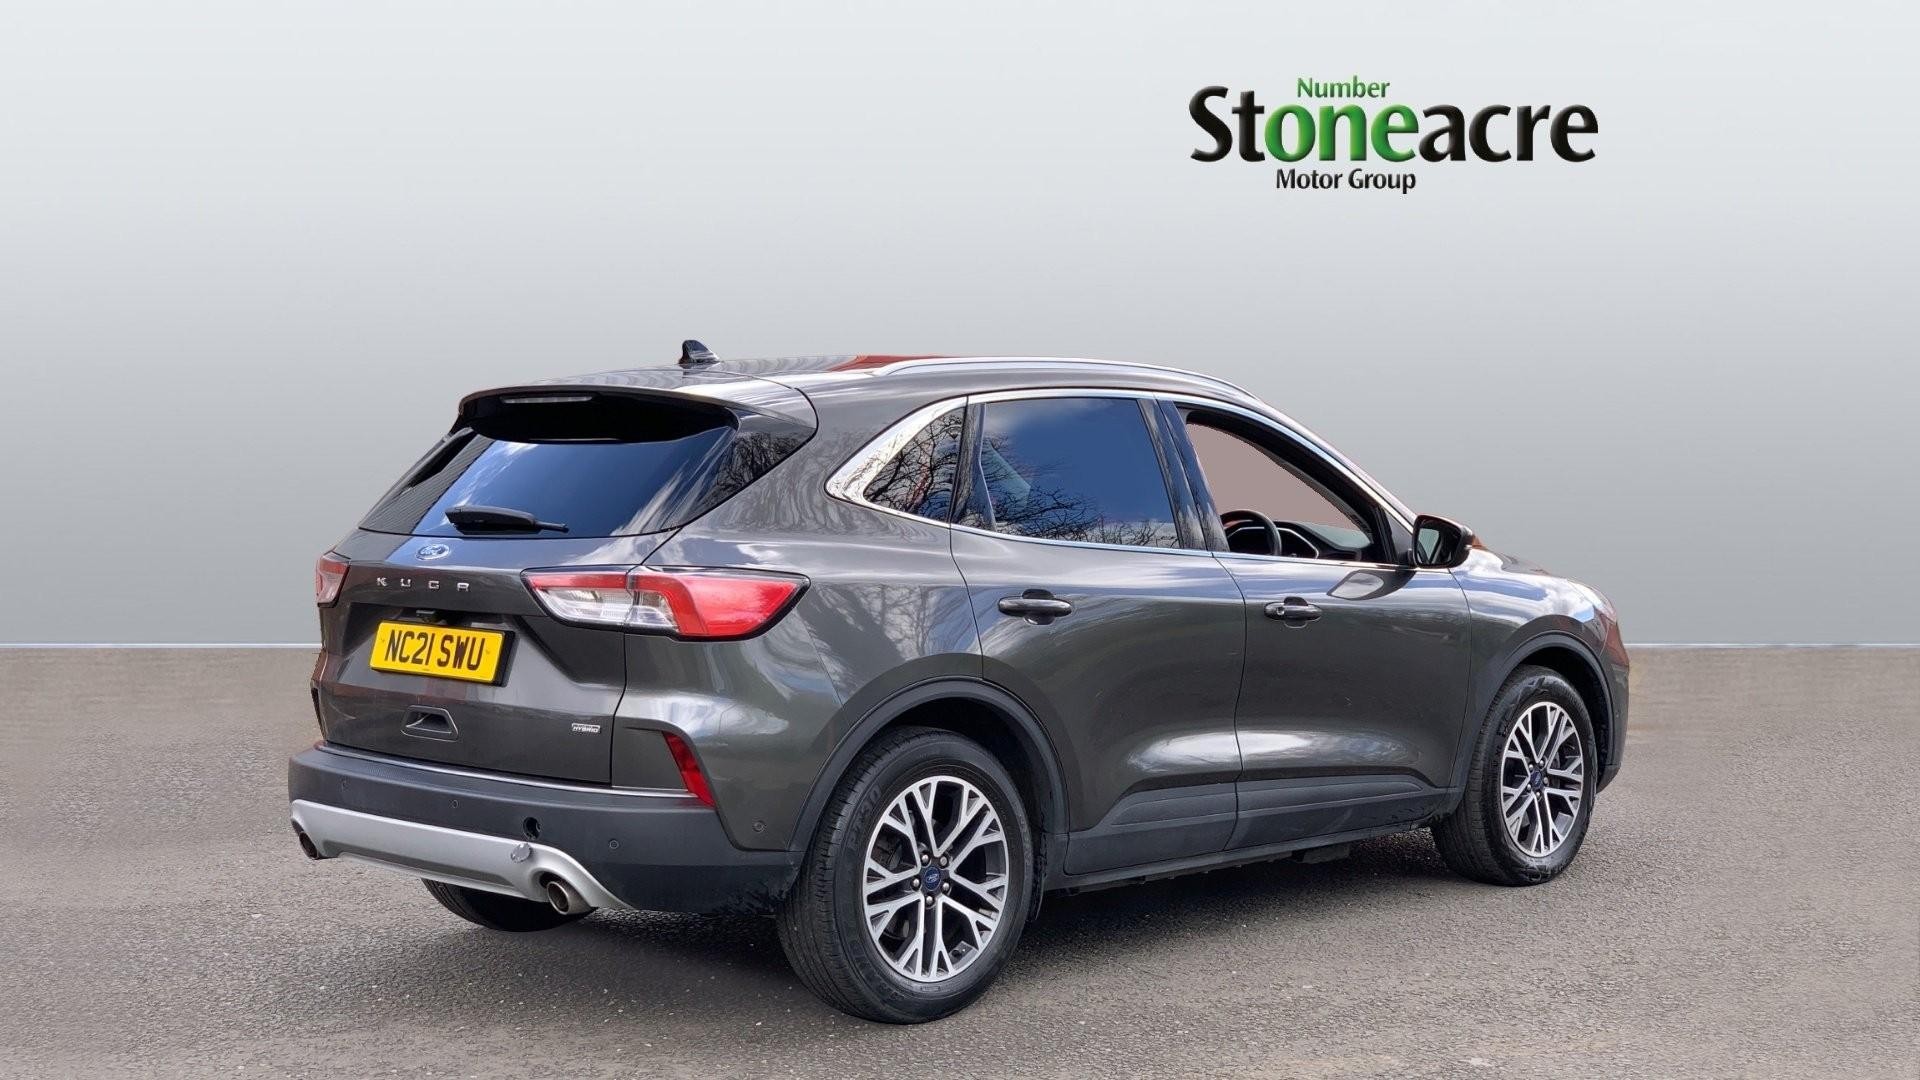 Ford Kuga 2.5 EcoBoost Duratec 14.4kWh Titanium First Edition SUV 5dr Petrol Plug-in Hybrid CVT Euro 6 (s/s) (225 ps) (NC21SWU) image 6